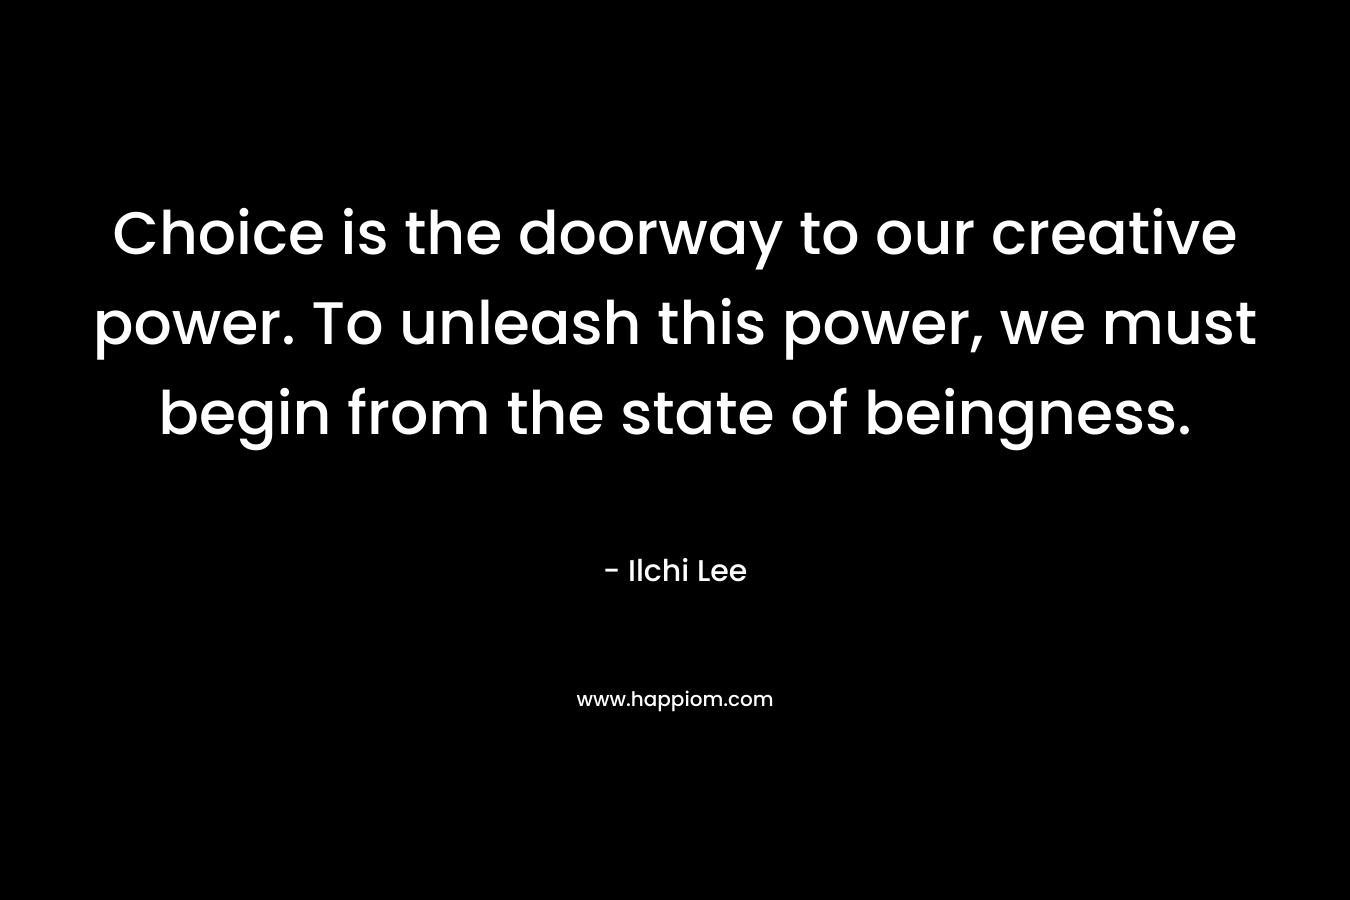 Choice is the doorway to our creative power. To unleash this power, we must begin from the state of beingness.